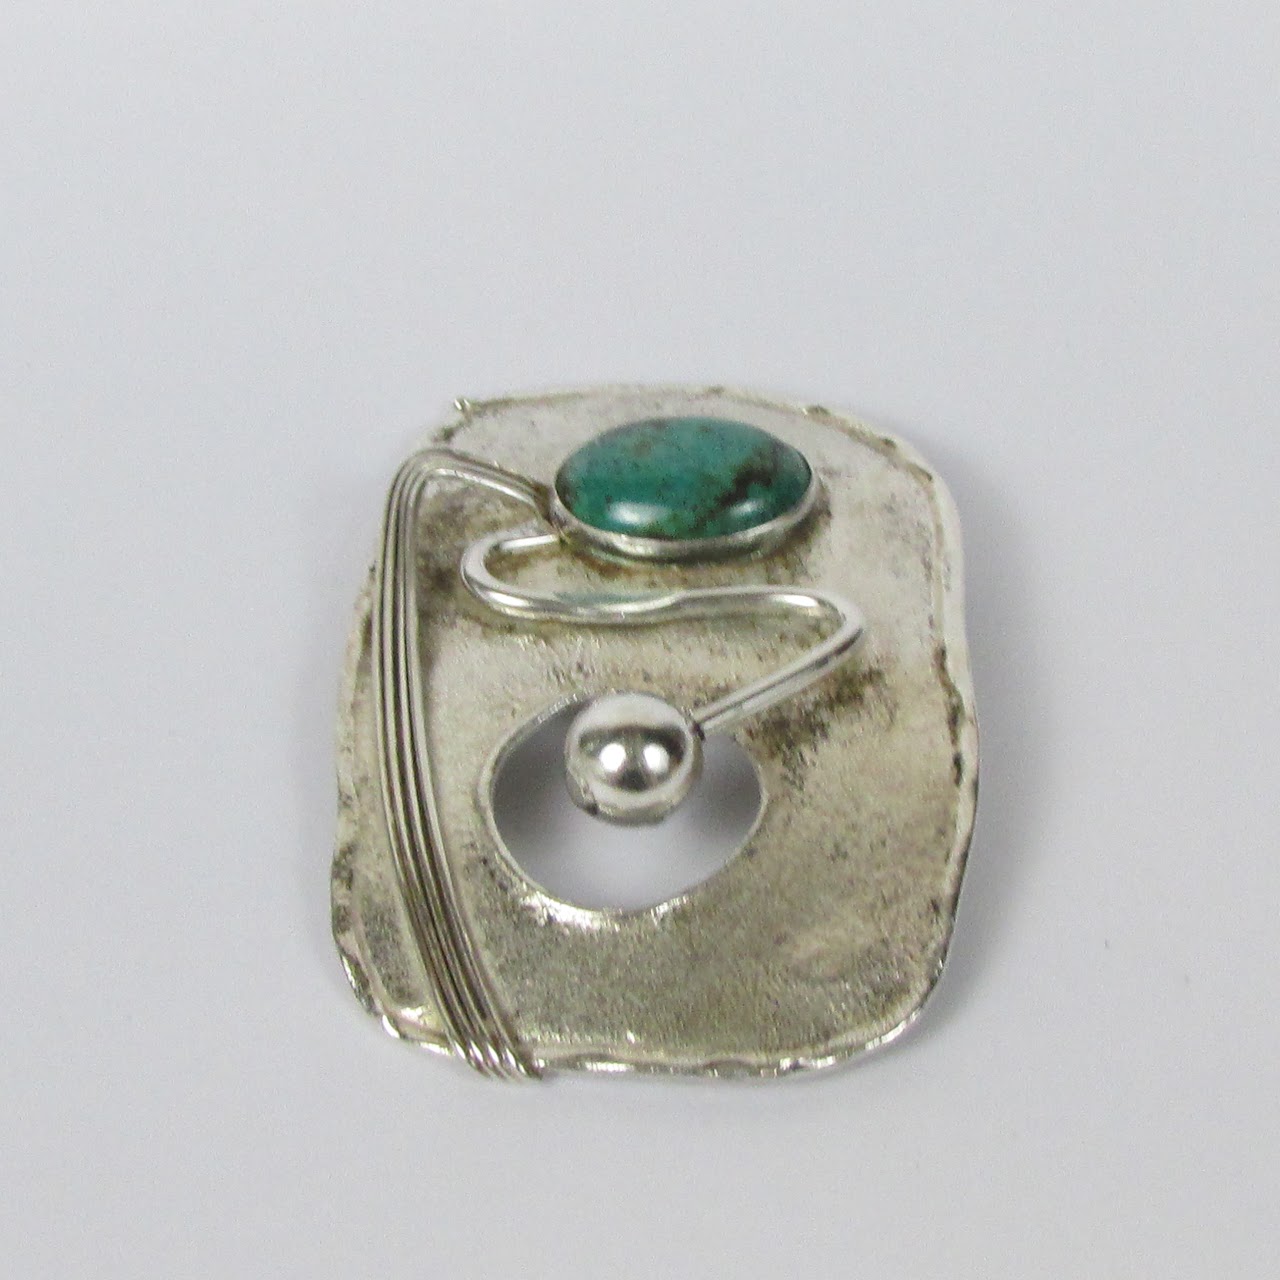 Silver & Turquoise Handmade Modernist Convertible Brooch